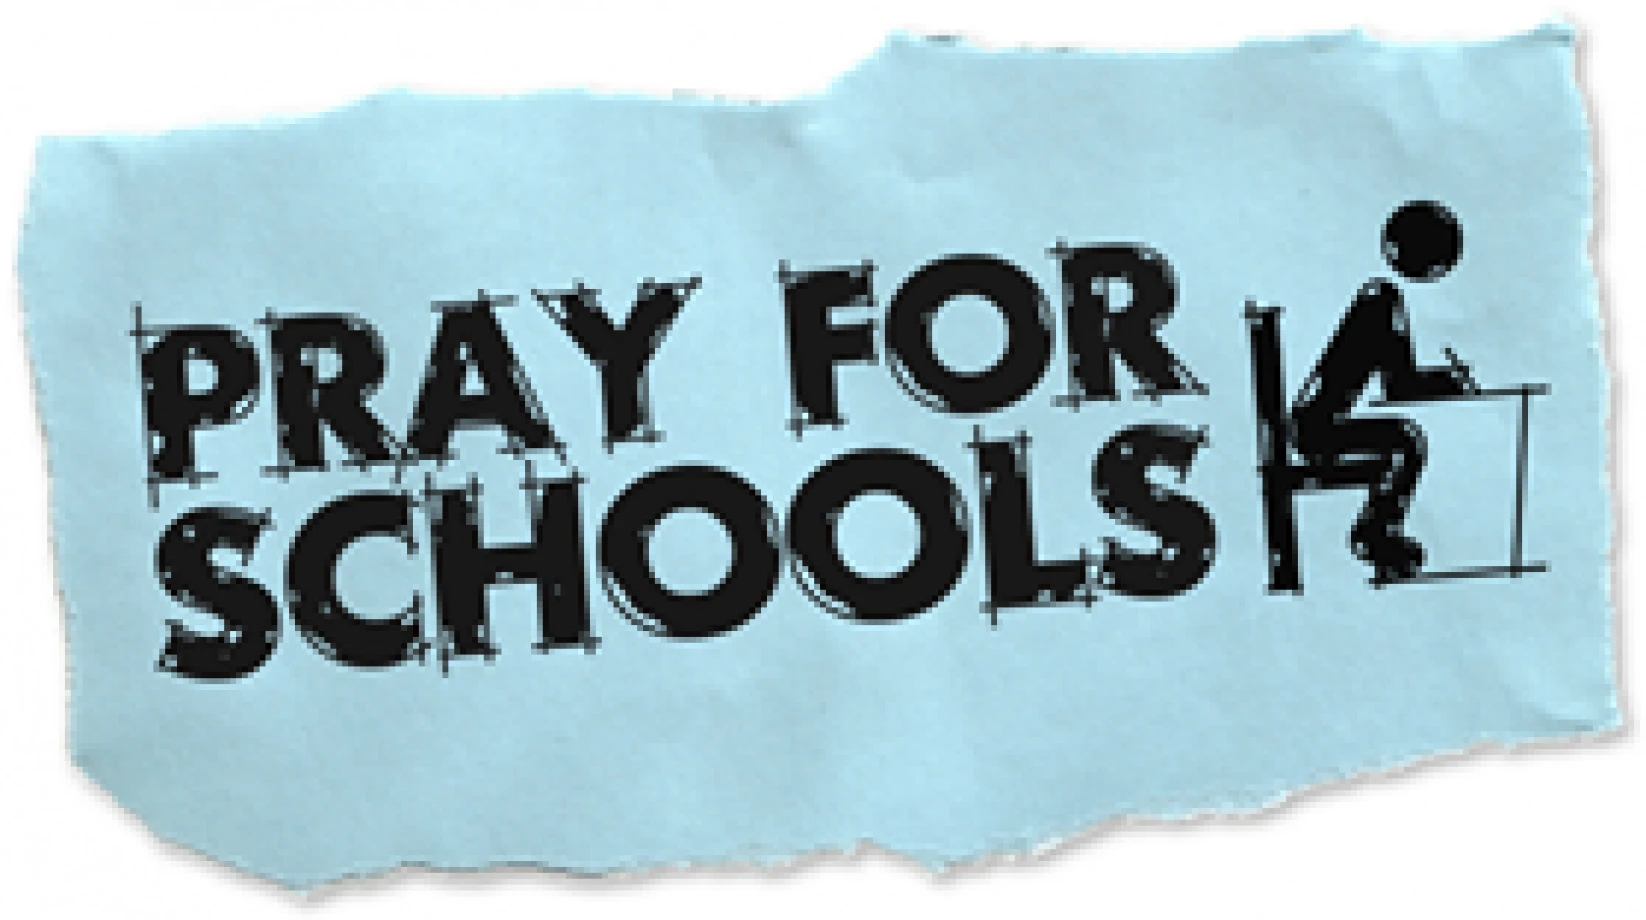 Pray for our schools